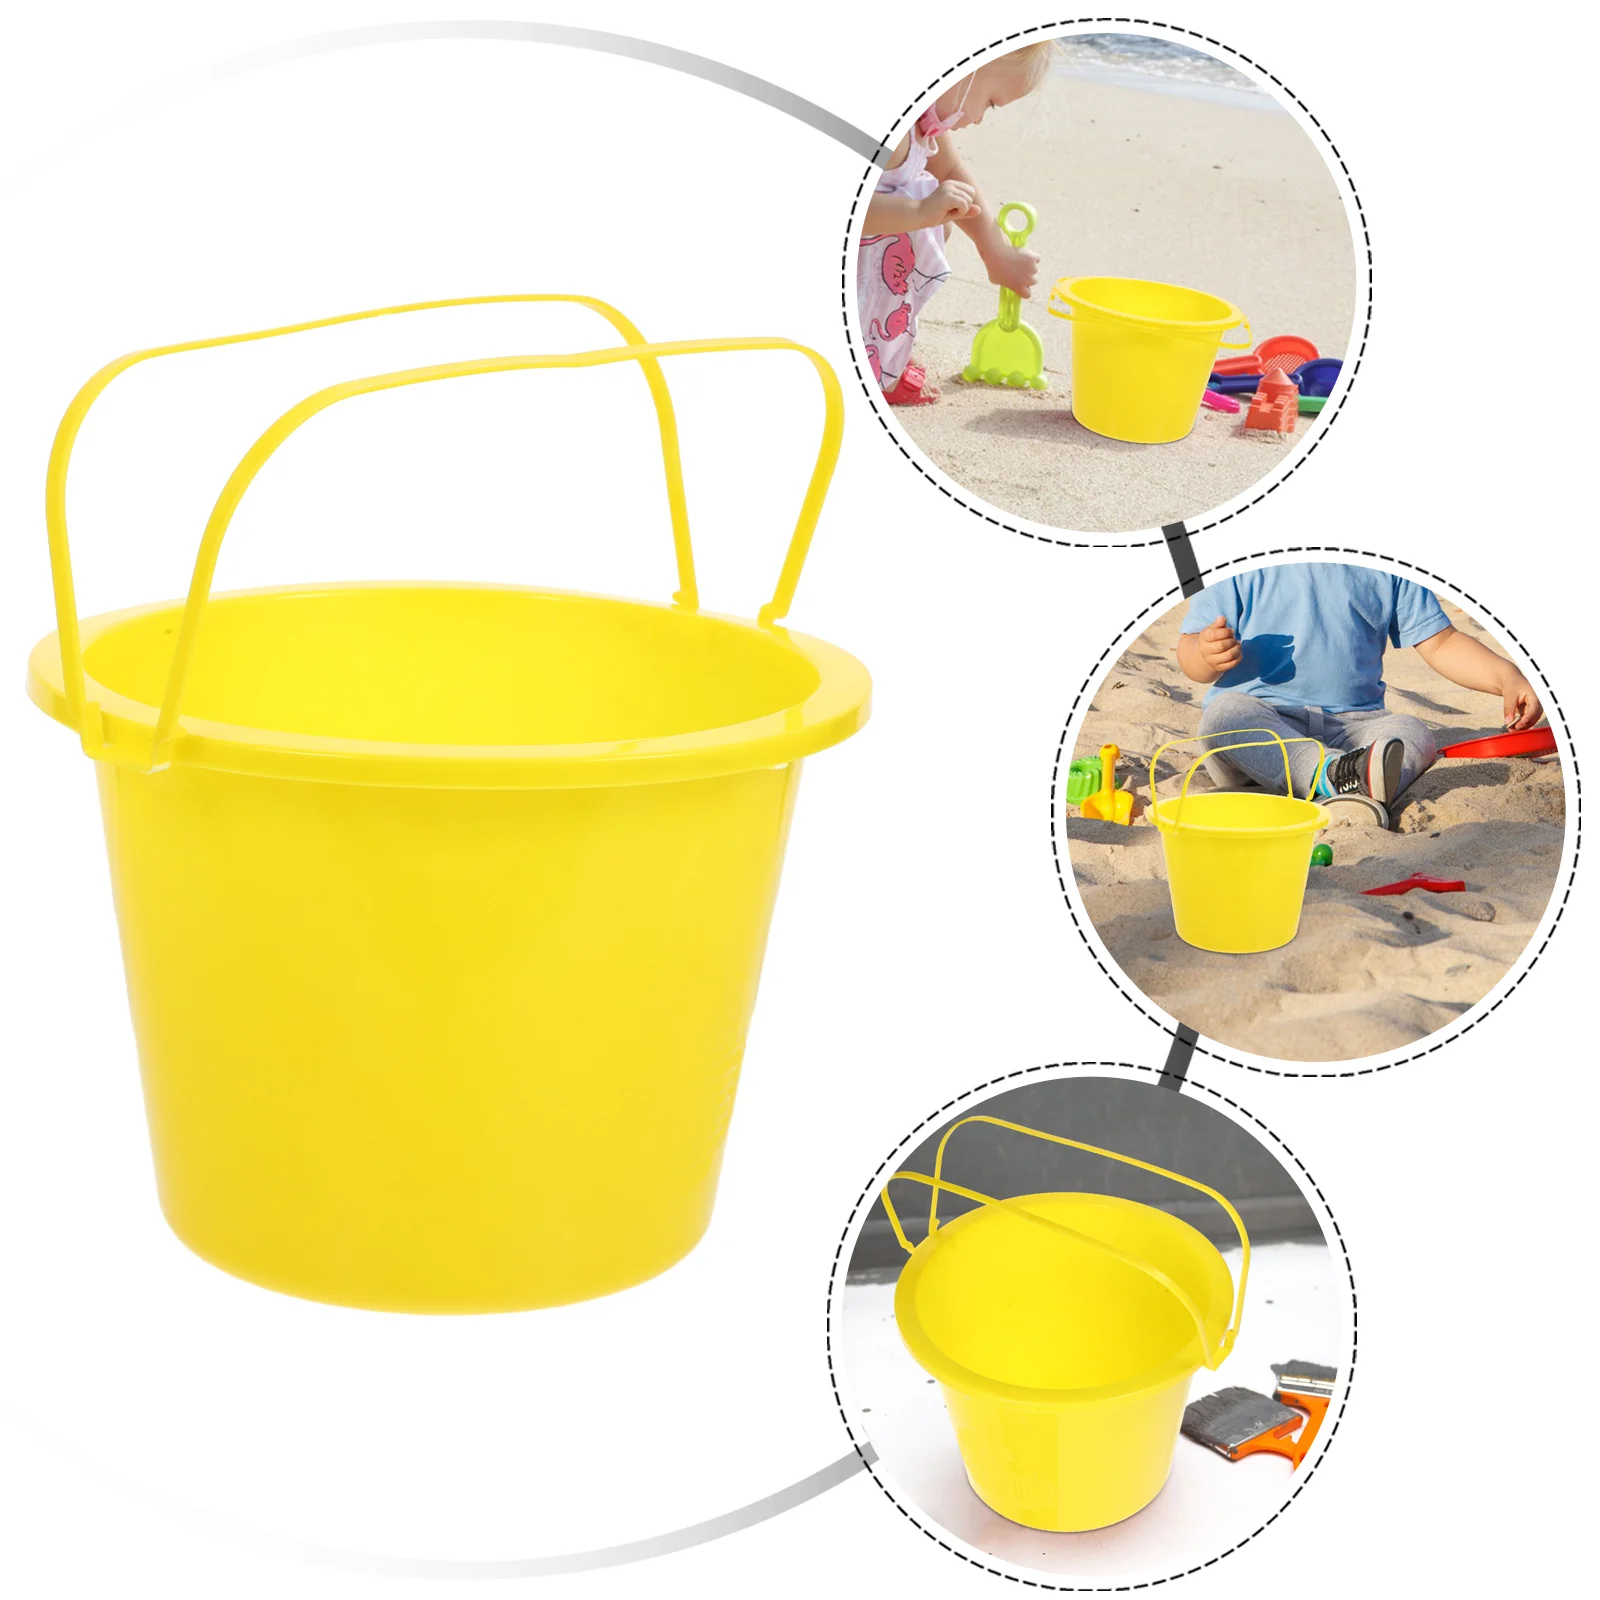 

Multipurpose Keg Buckets for Cleaning Paint Bucket With Handles For Painting Pail Small Container Plastic Hand-held